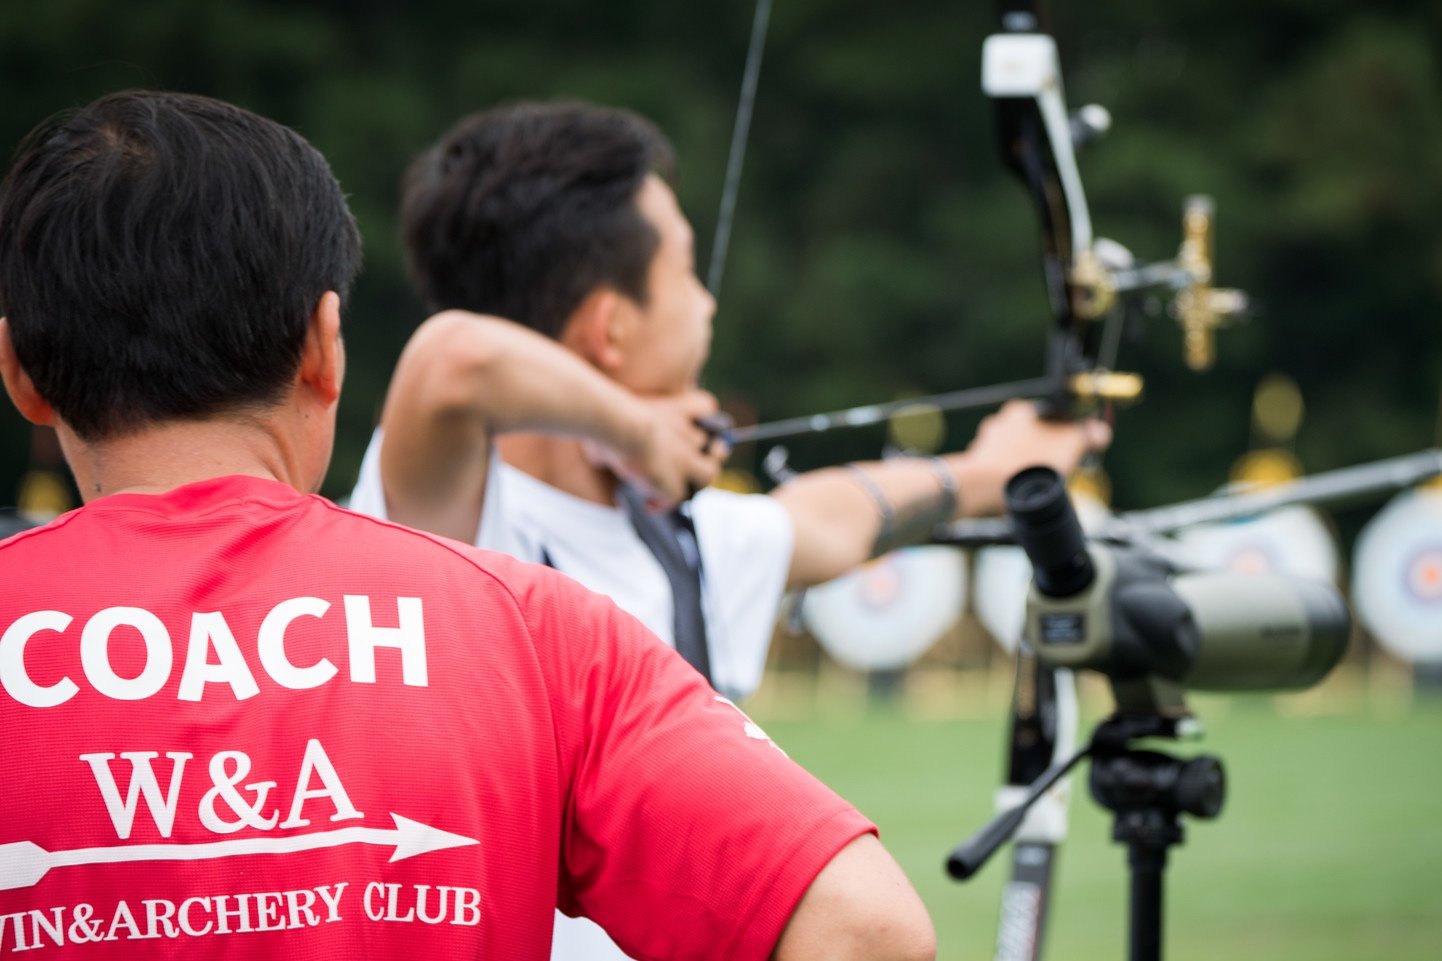   A Life’s Mission   With 40 years of archery experience and 133 international medals, our coach is dedicated to helping our archers reach their full potential. 